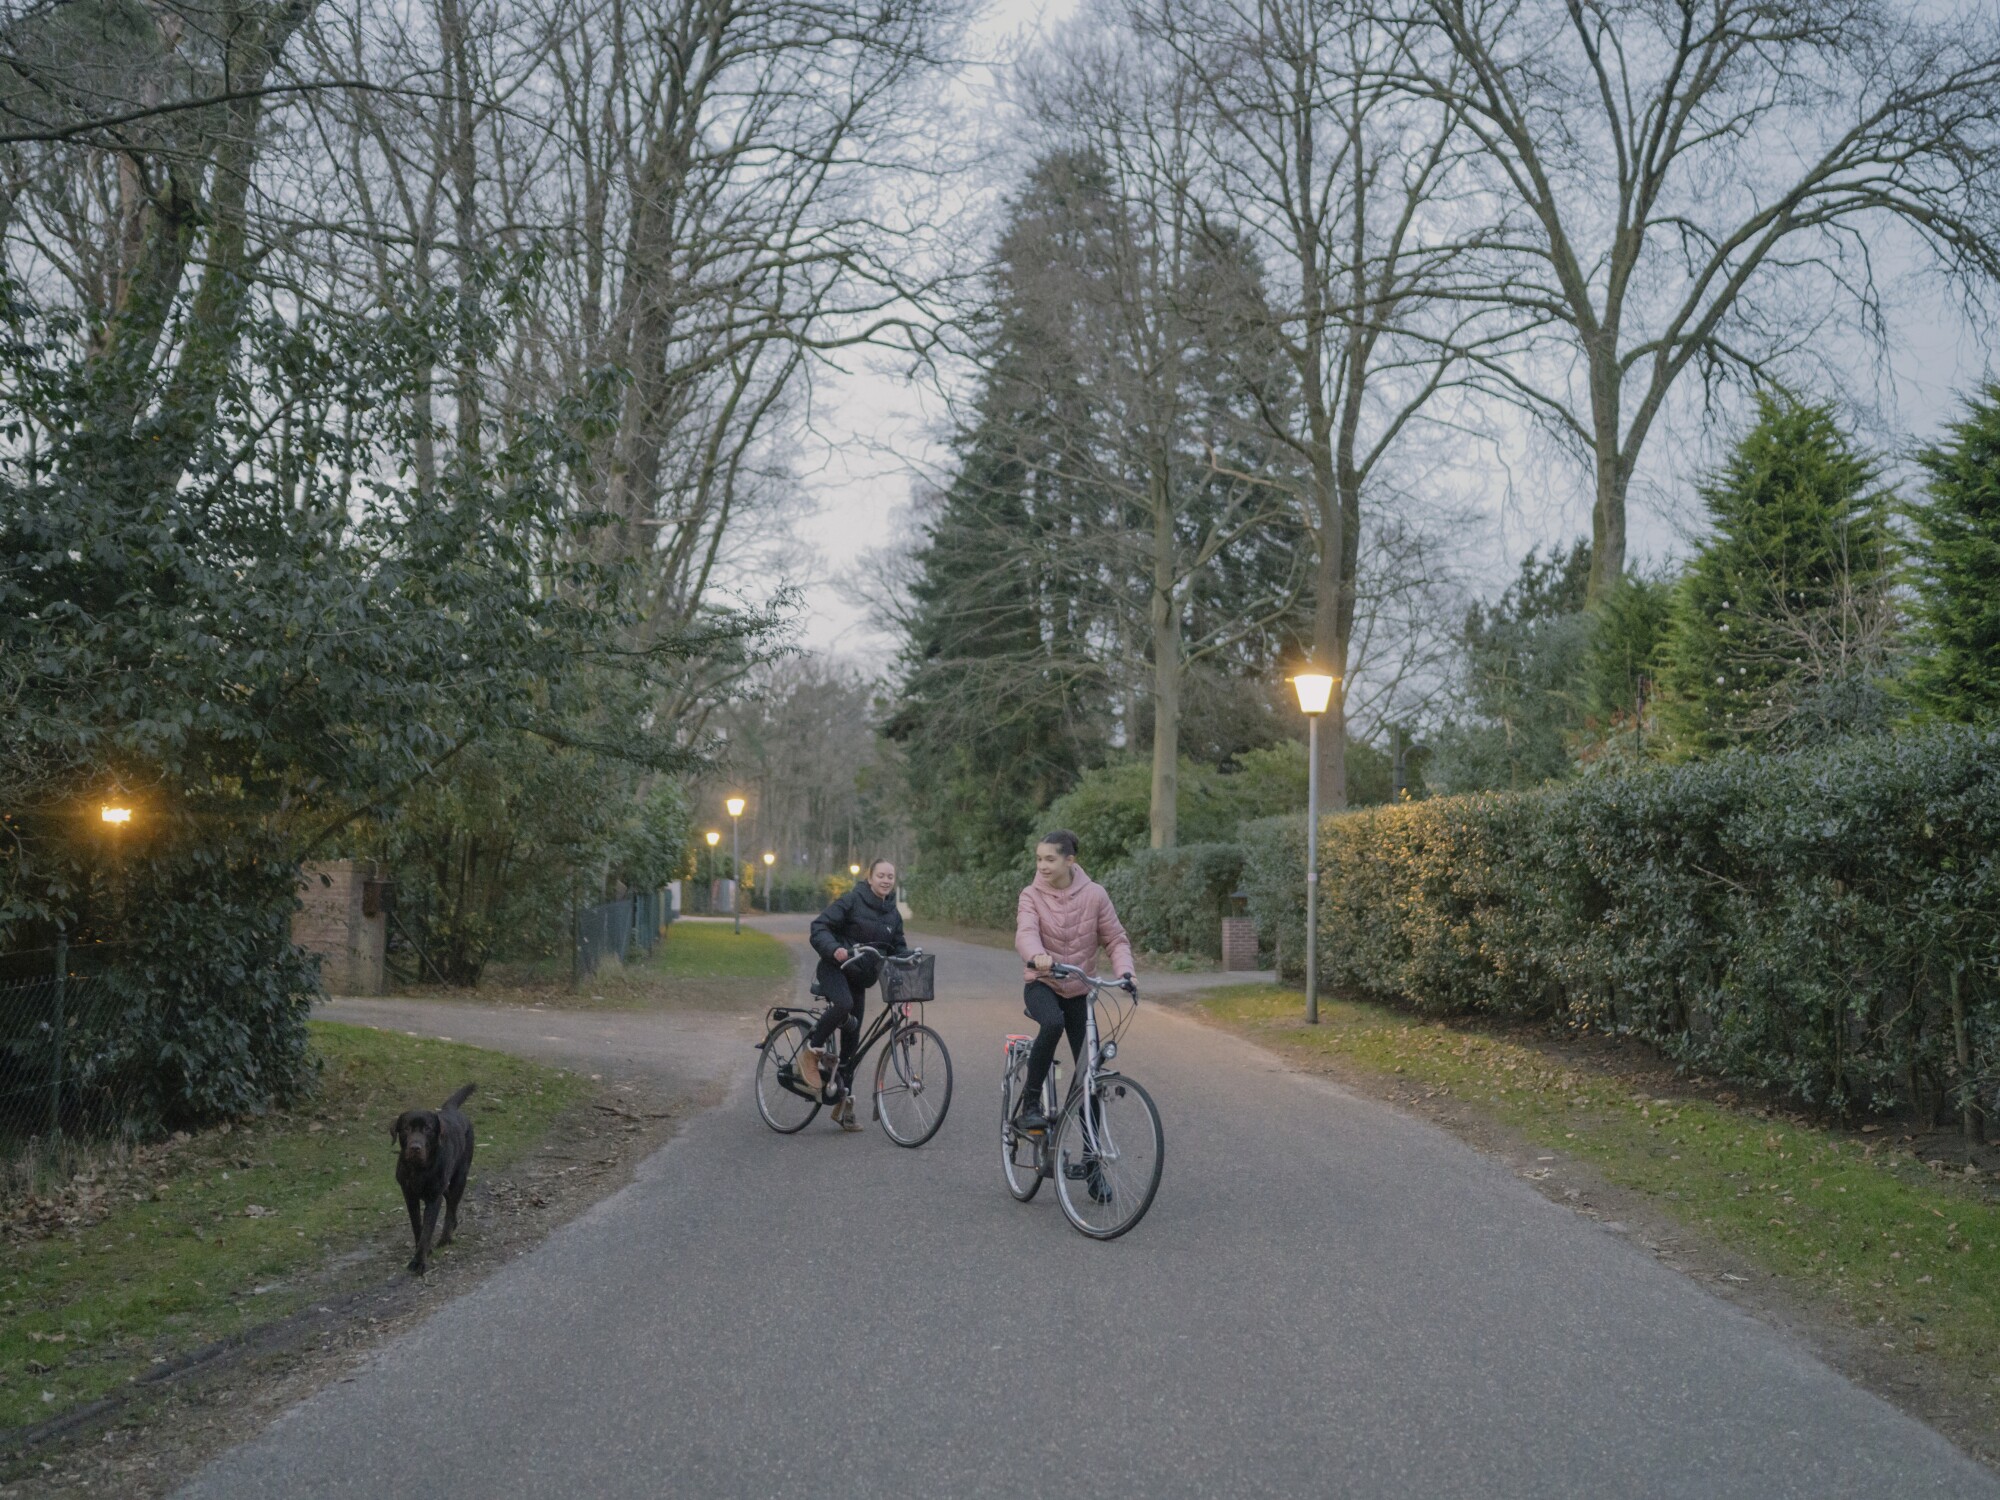 Two girls ride bikes down a street with a black dog walking next to them 